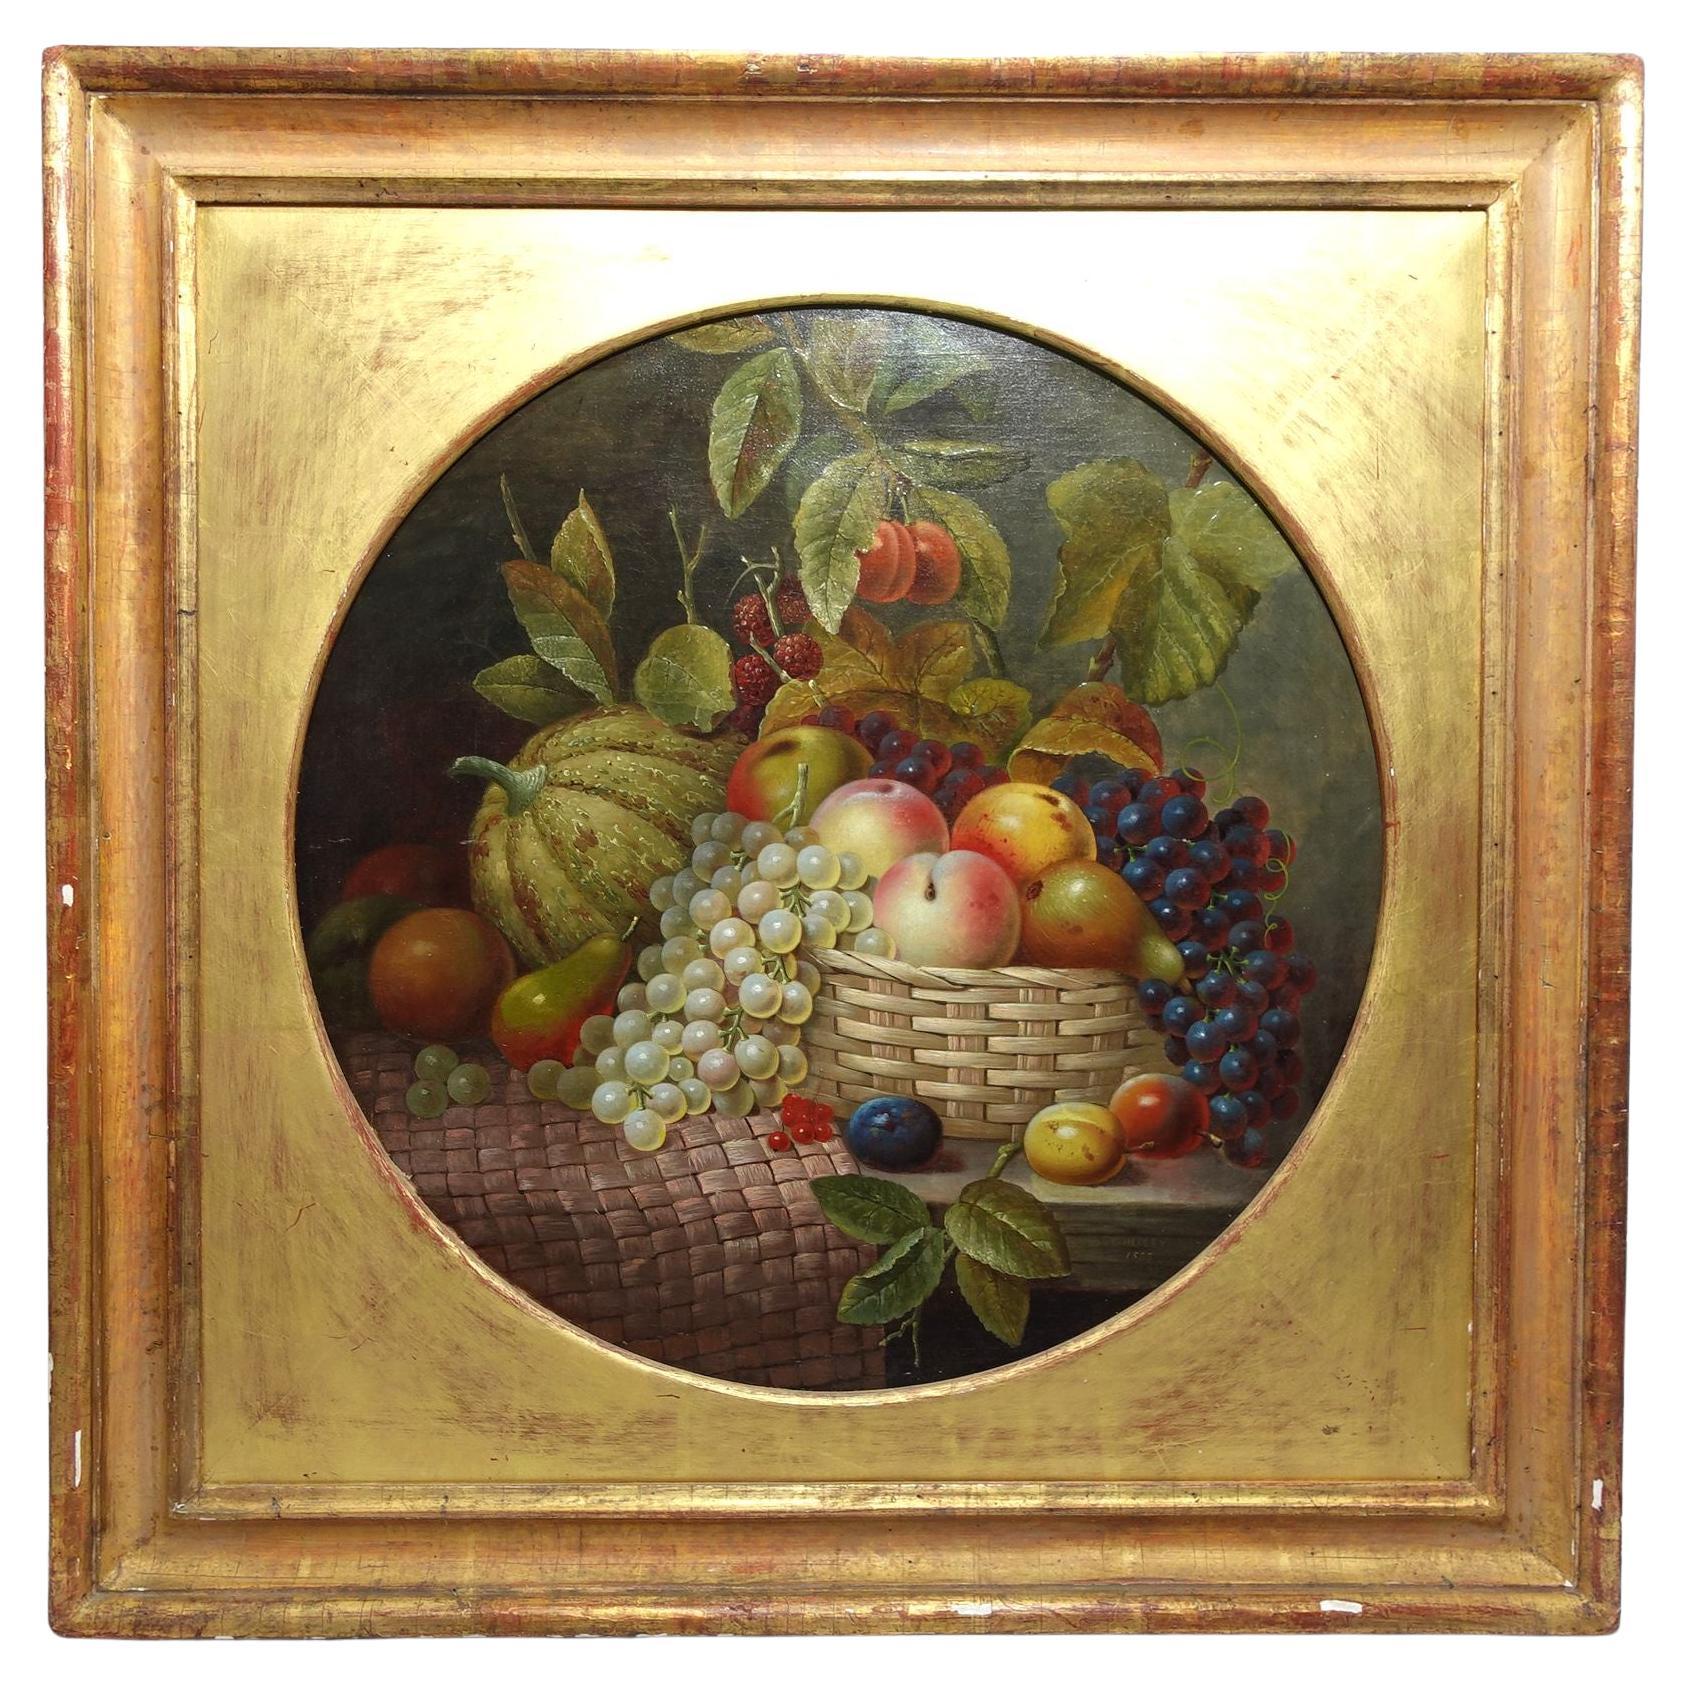 Oil Painting, "Still Life with Fruit", by George Hedley, 1855 For Sale